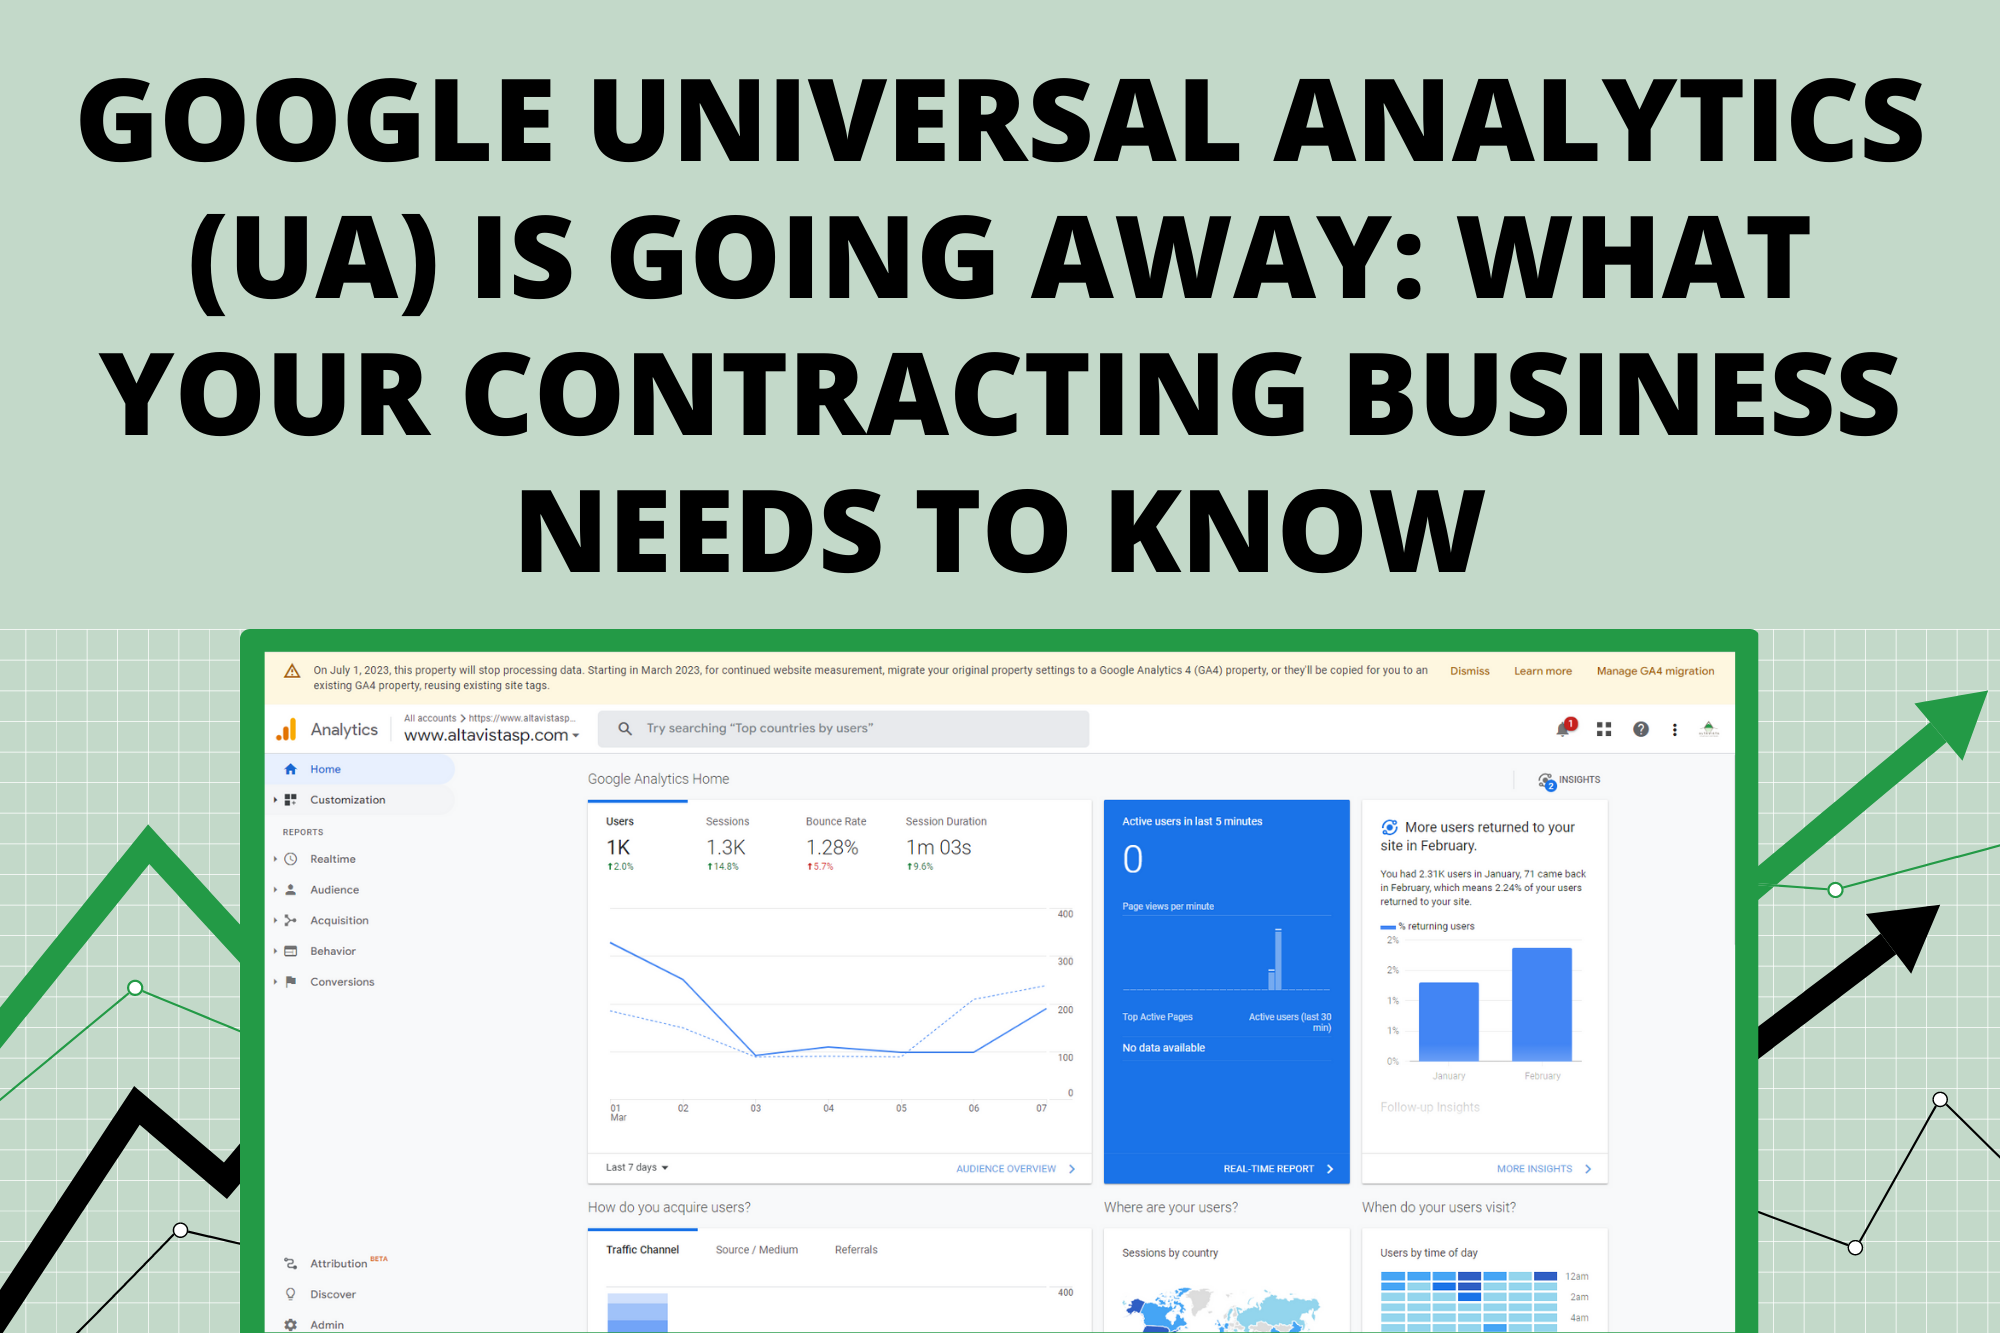 Google Universal Analytics (UA) is Going Away: What Your Contracting Business Needs to Know